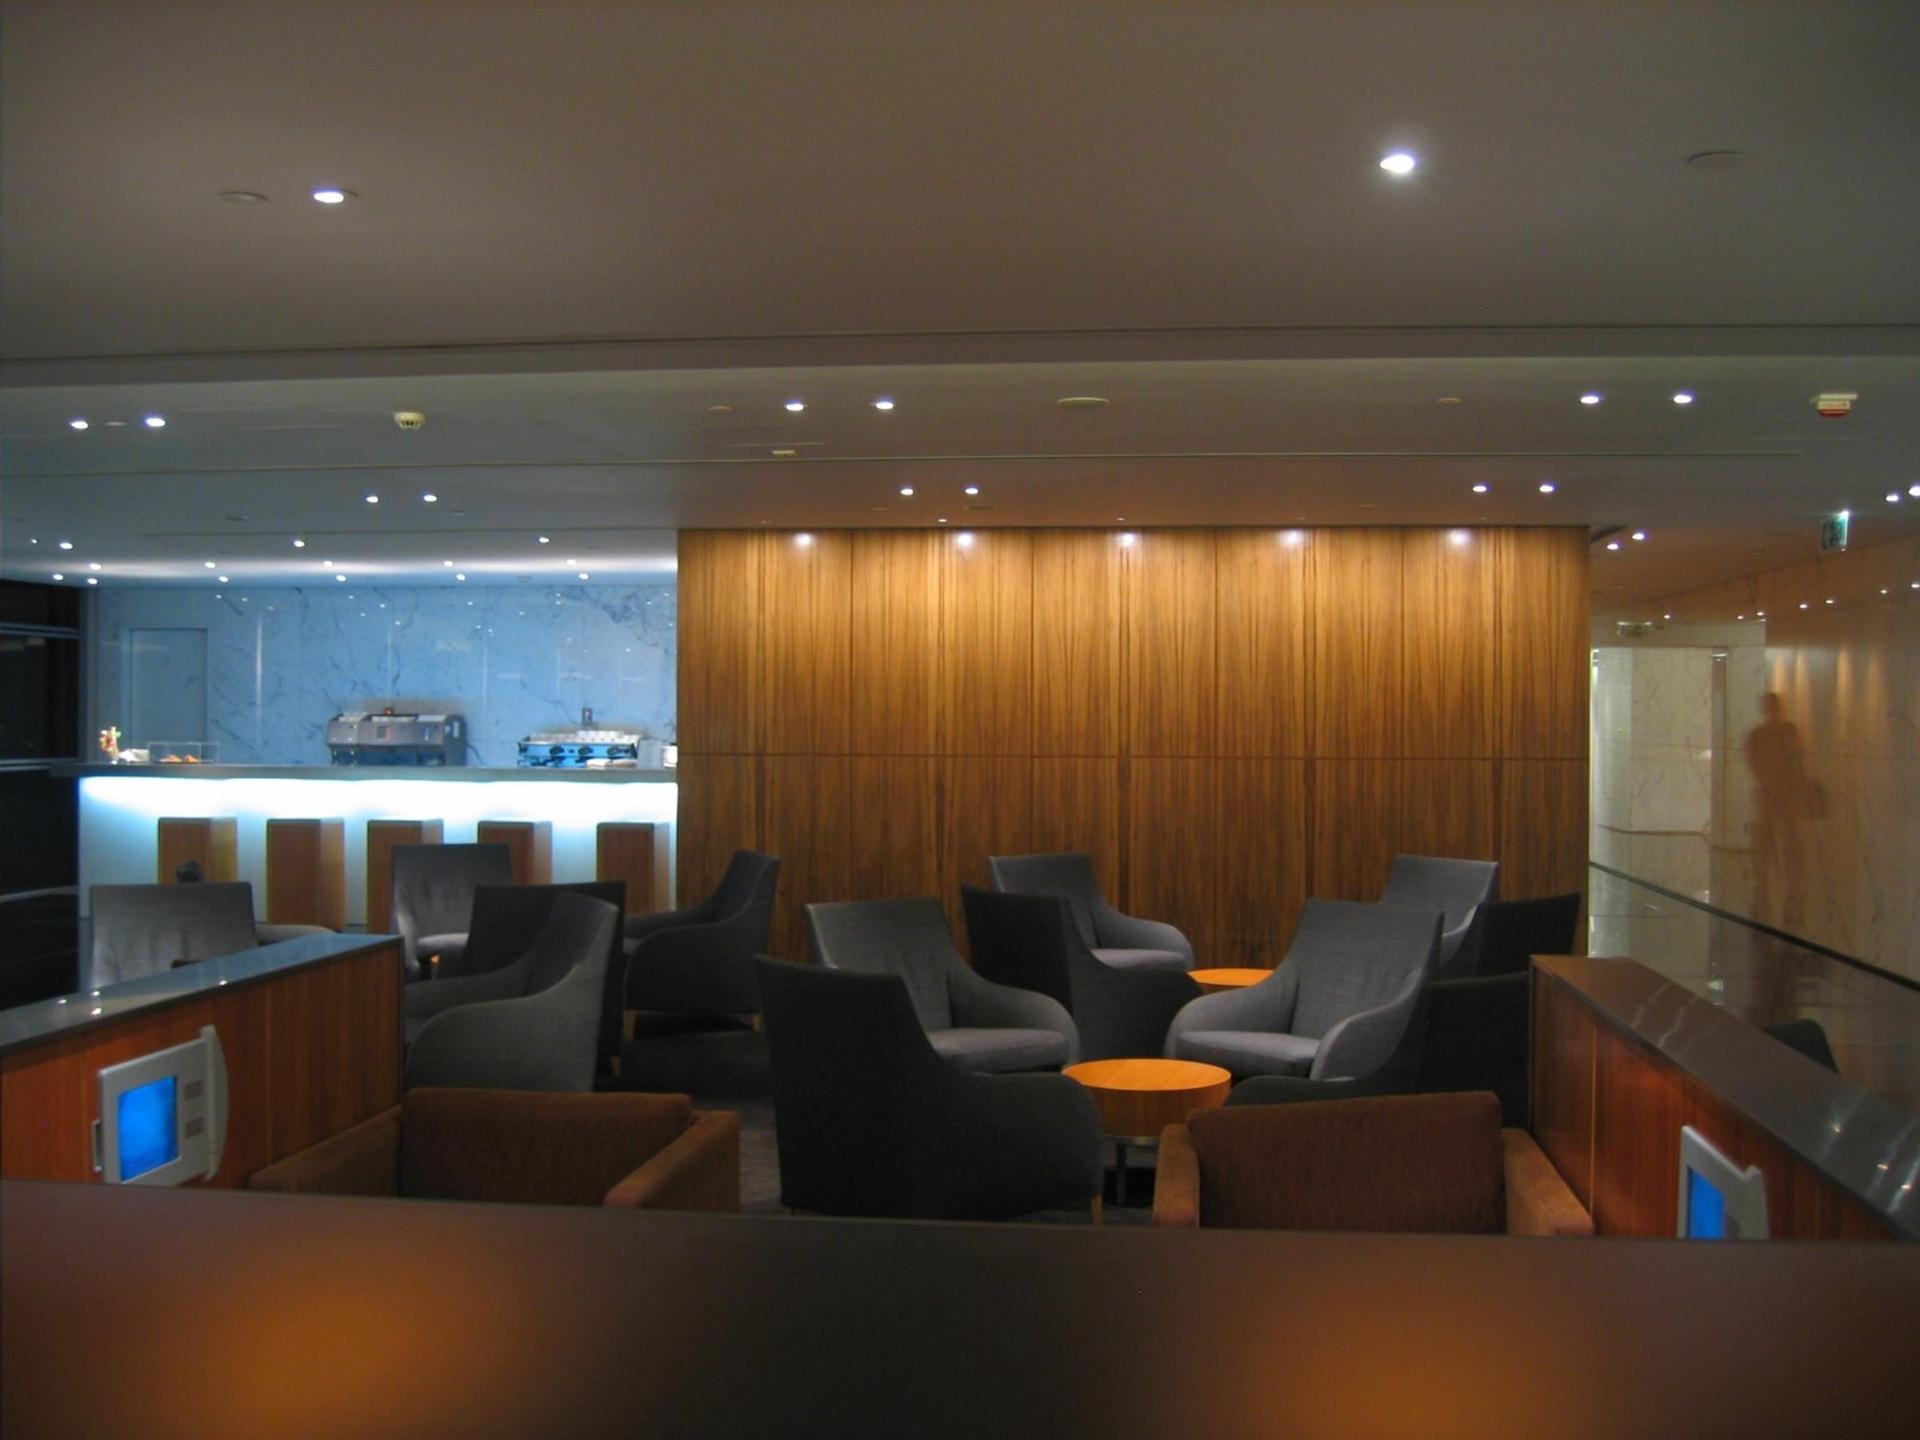 Cathay Pacific The Wing Business Class Lounge image 20 of 55